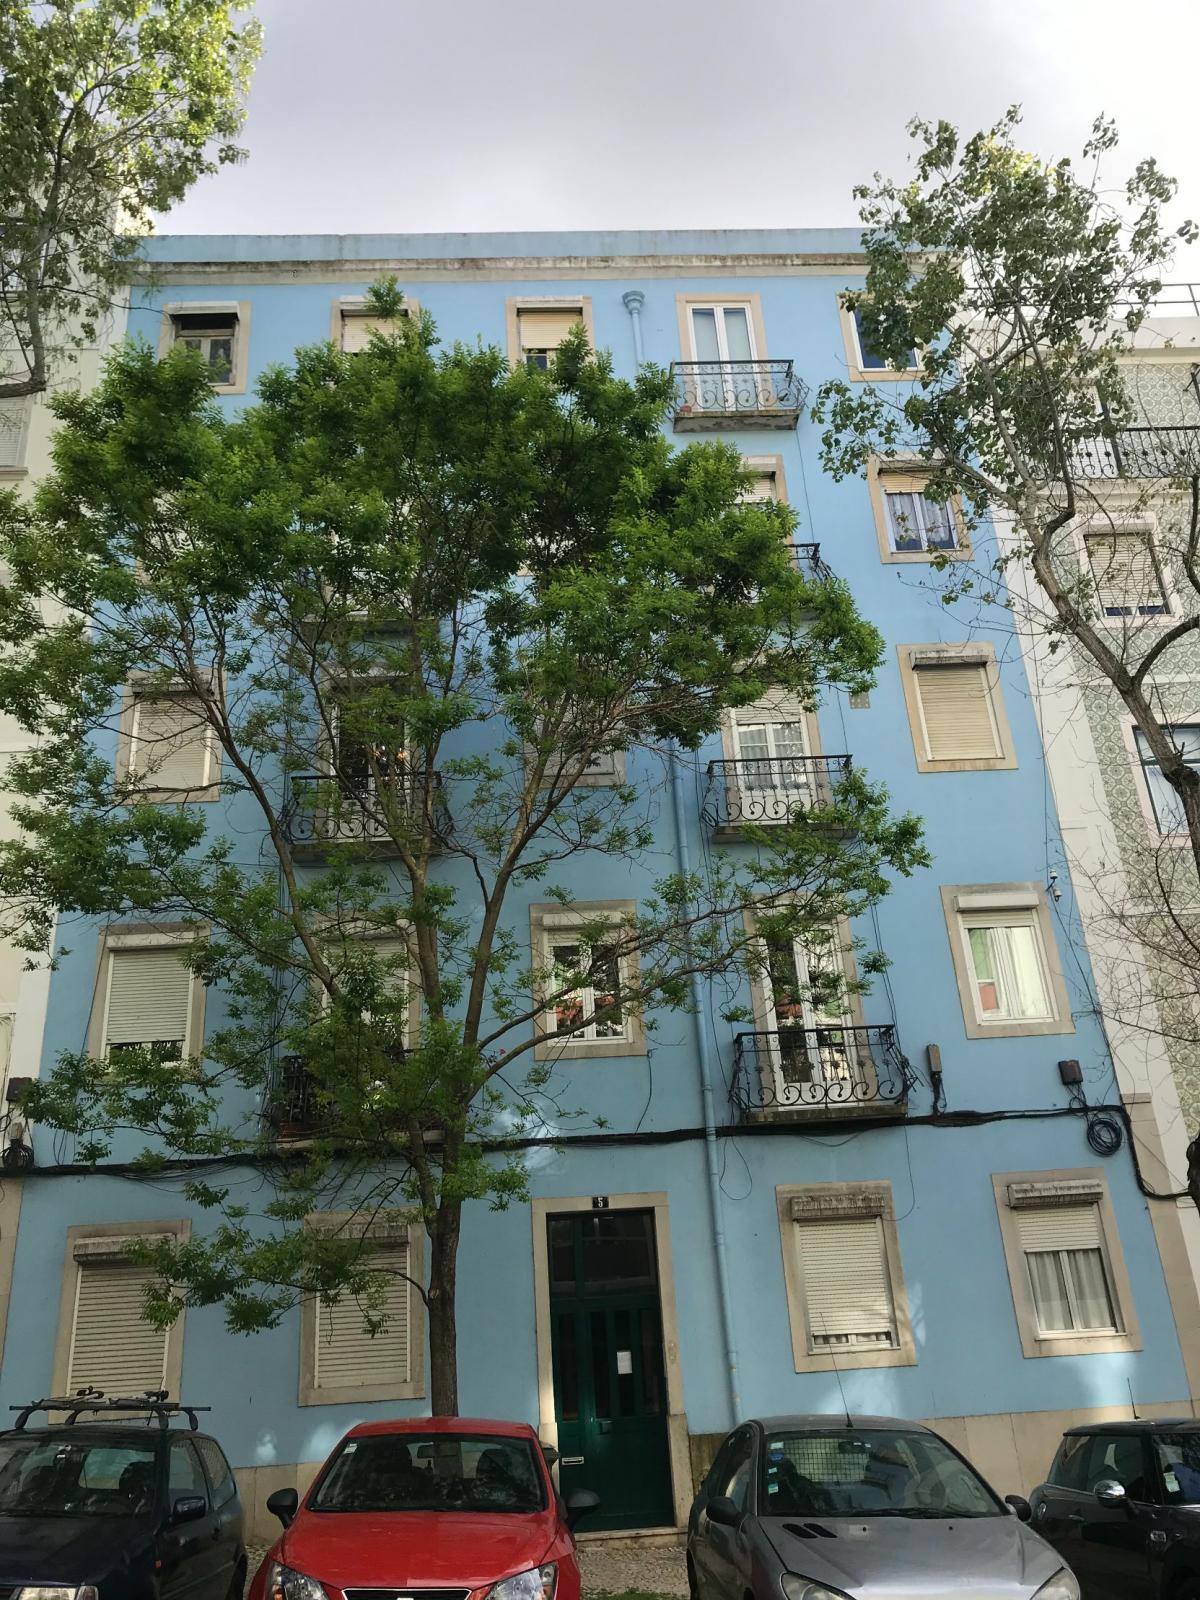 Picture of Apartment For Sale in Lisboa, Lisboa, Portugal